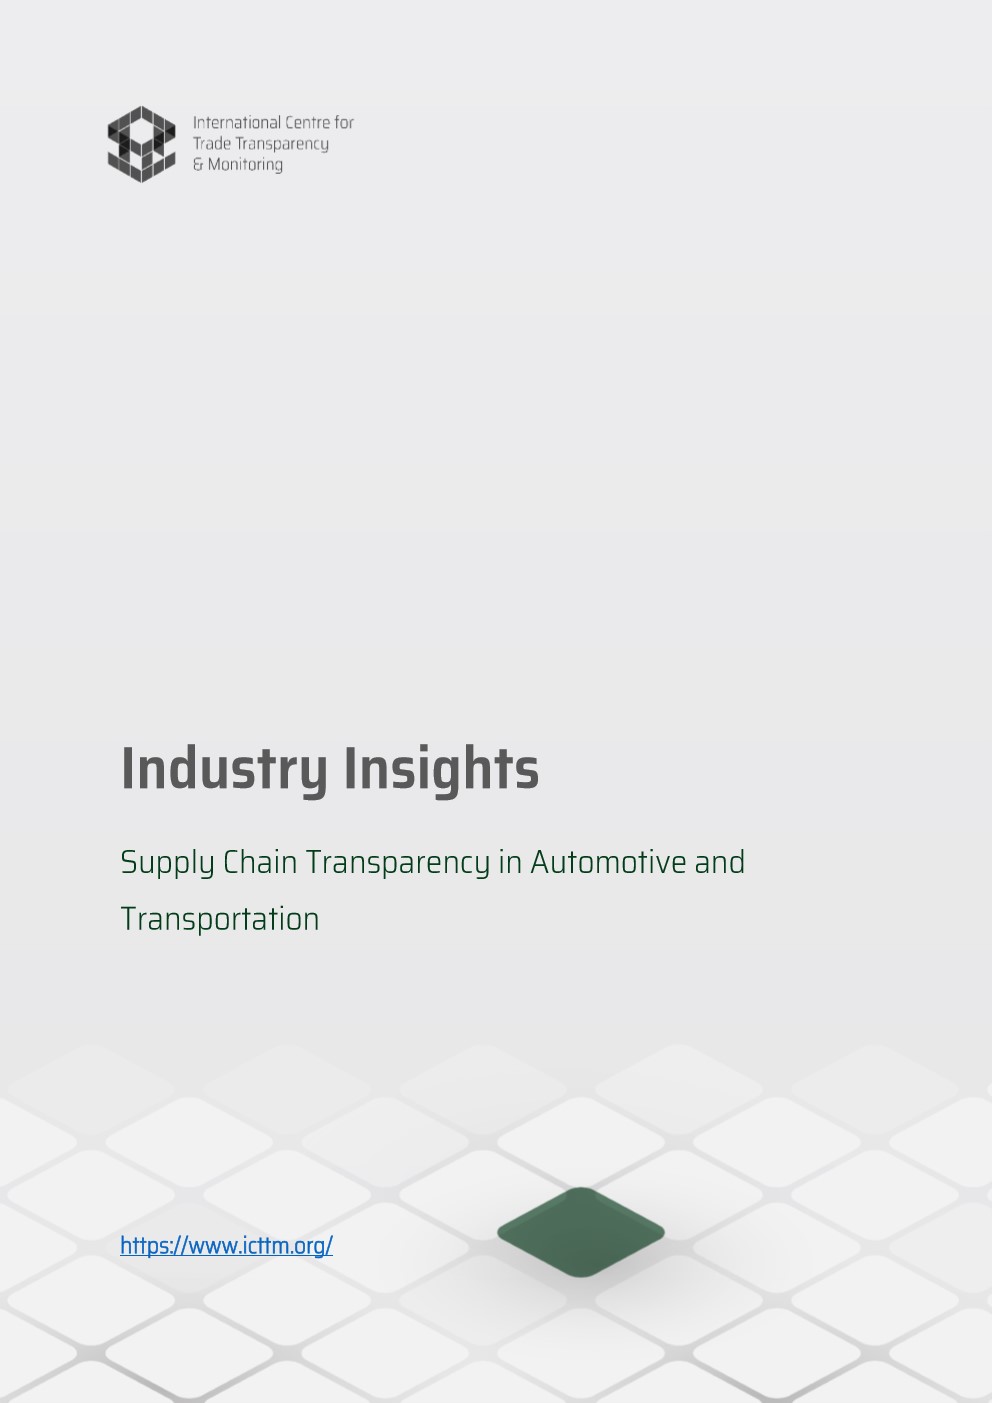 Supply Chain Transparency in Automotive and Transportation